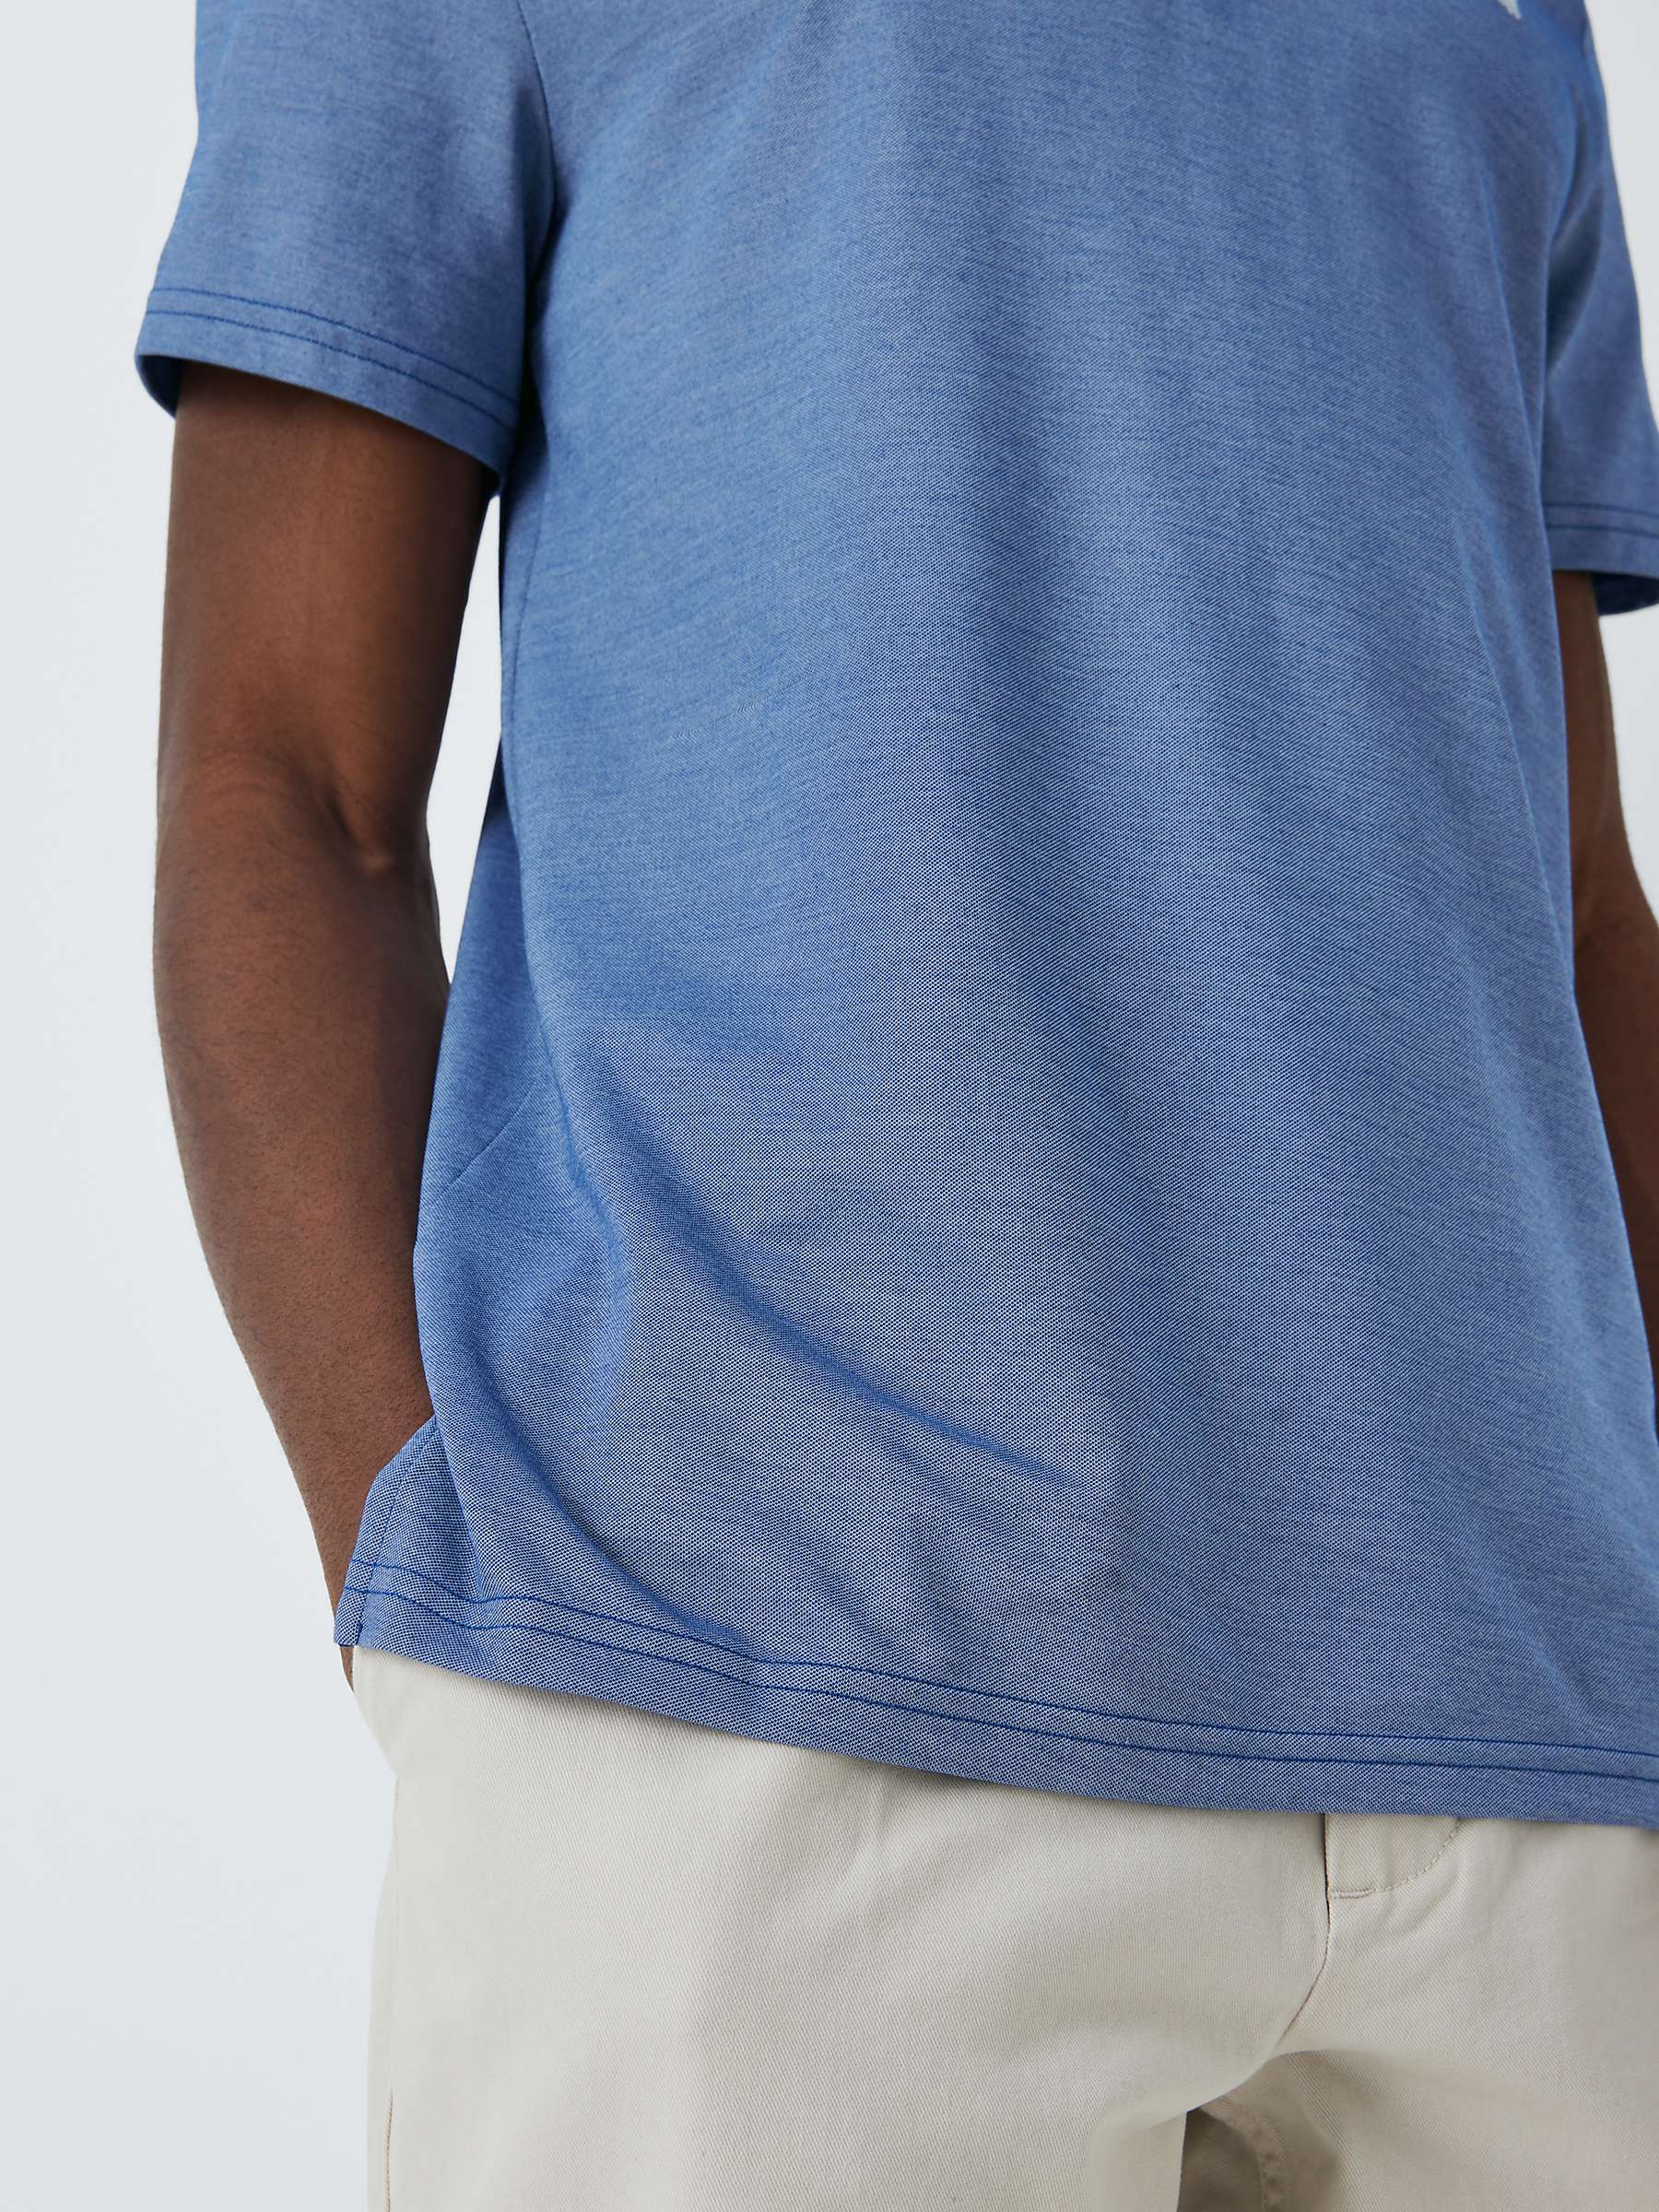 Buy Ralph Lauren Tailored Fit Performance Mesh Polo Shirt Online at johnlewis.com